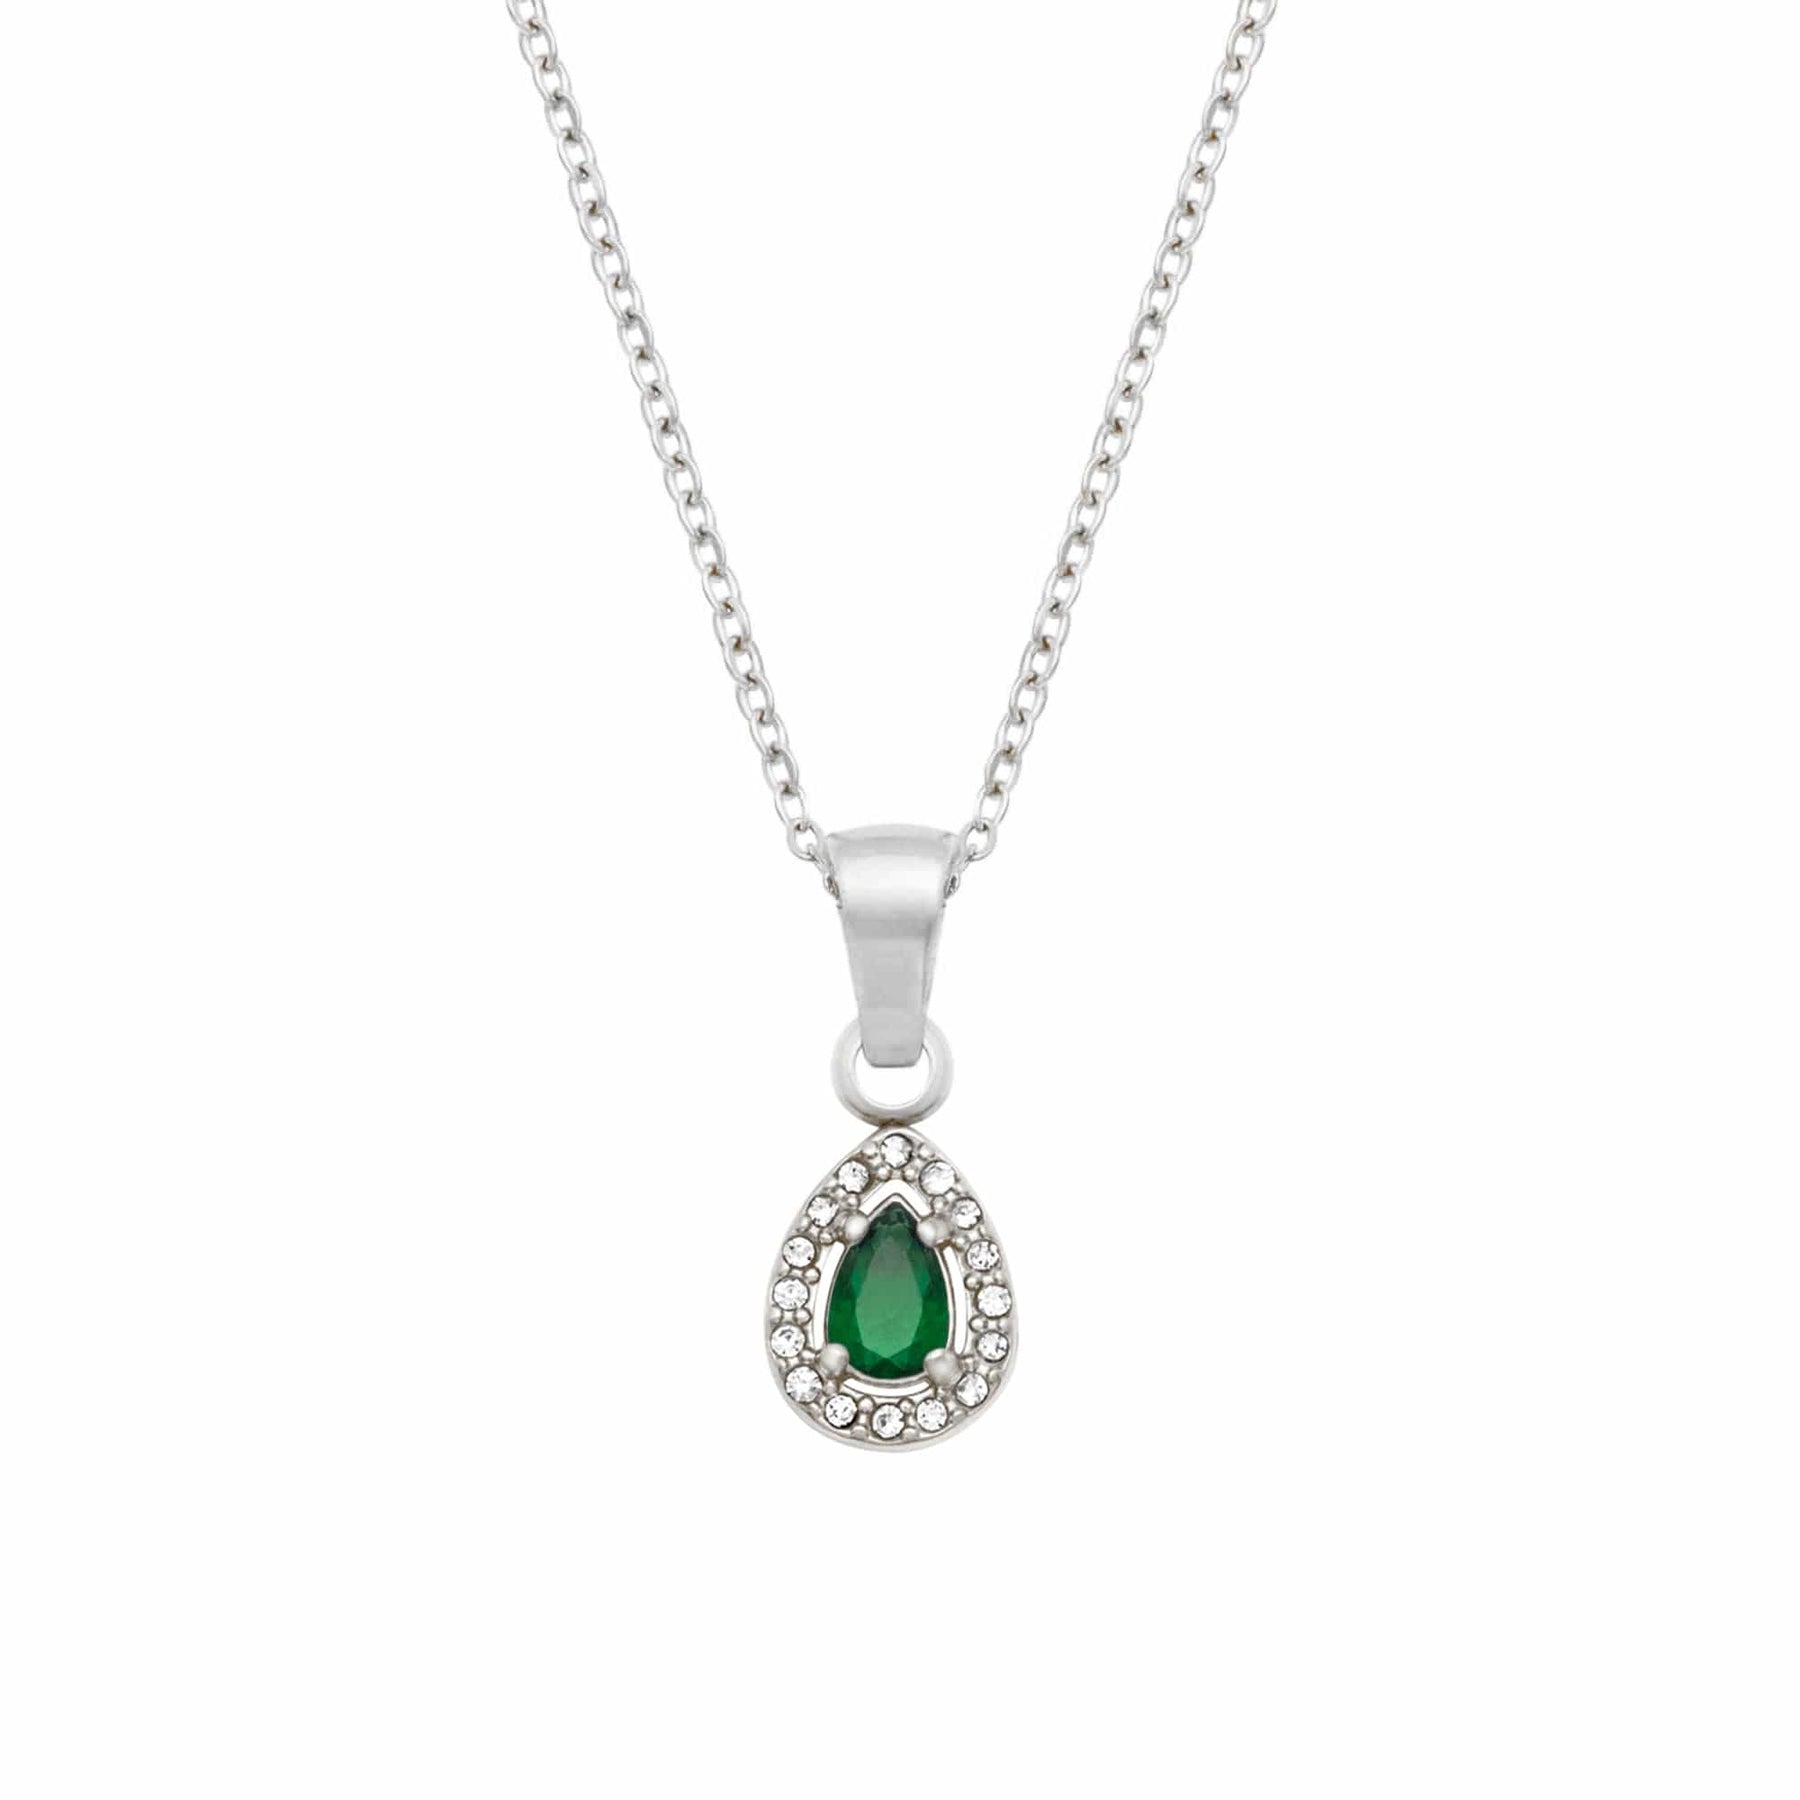 BohoMoon Stainless Steel Alcudia Necklace Silver / Green